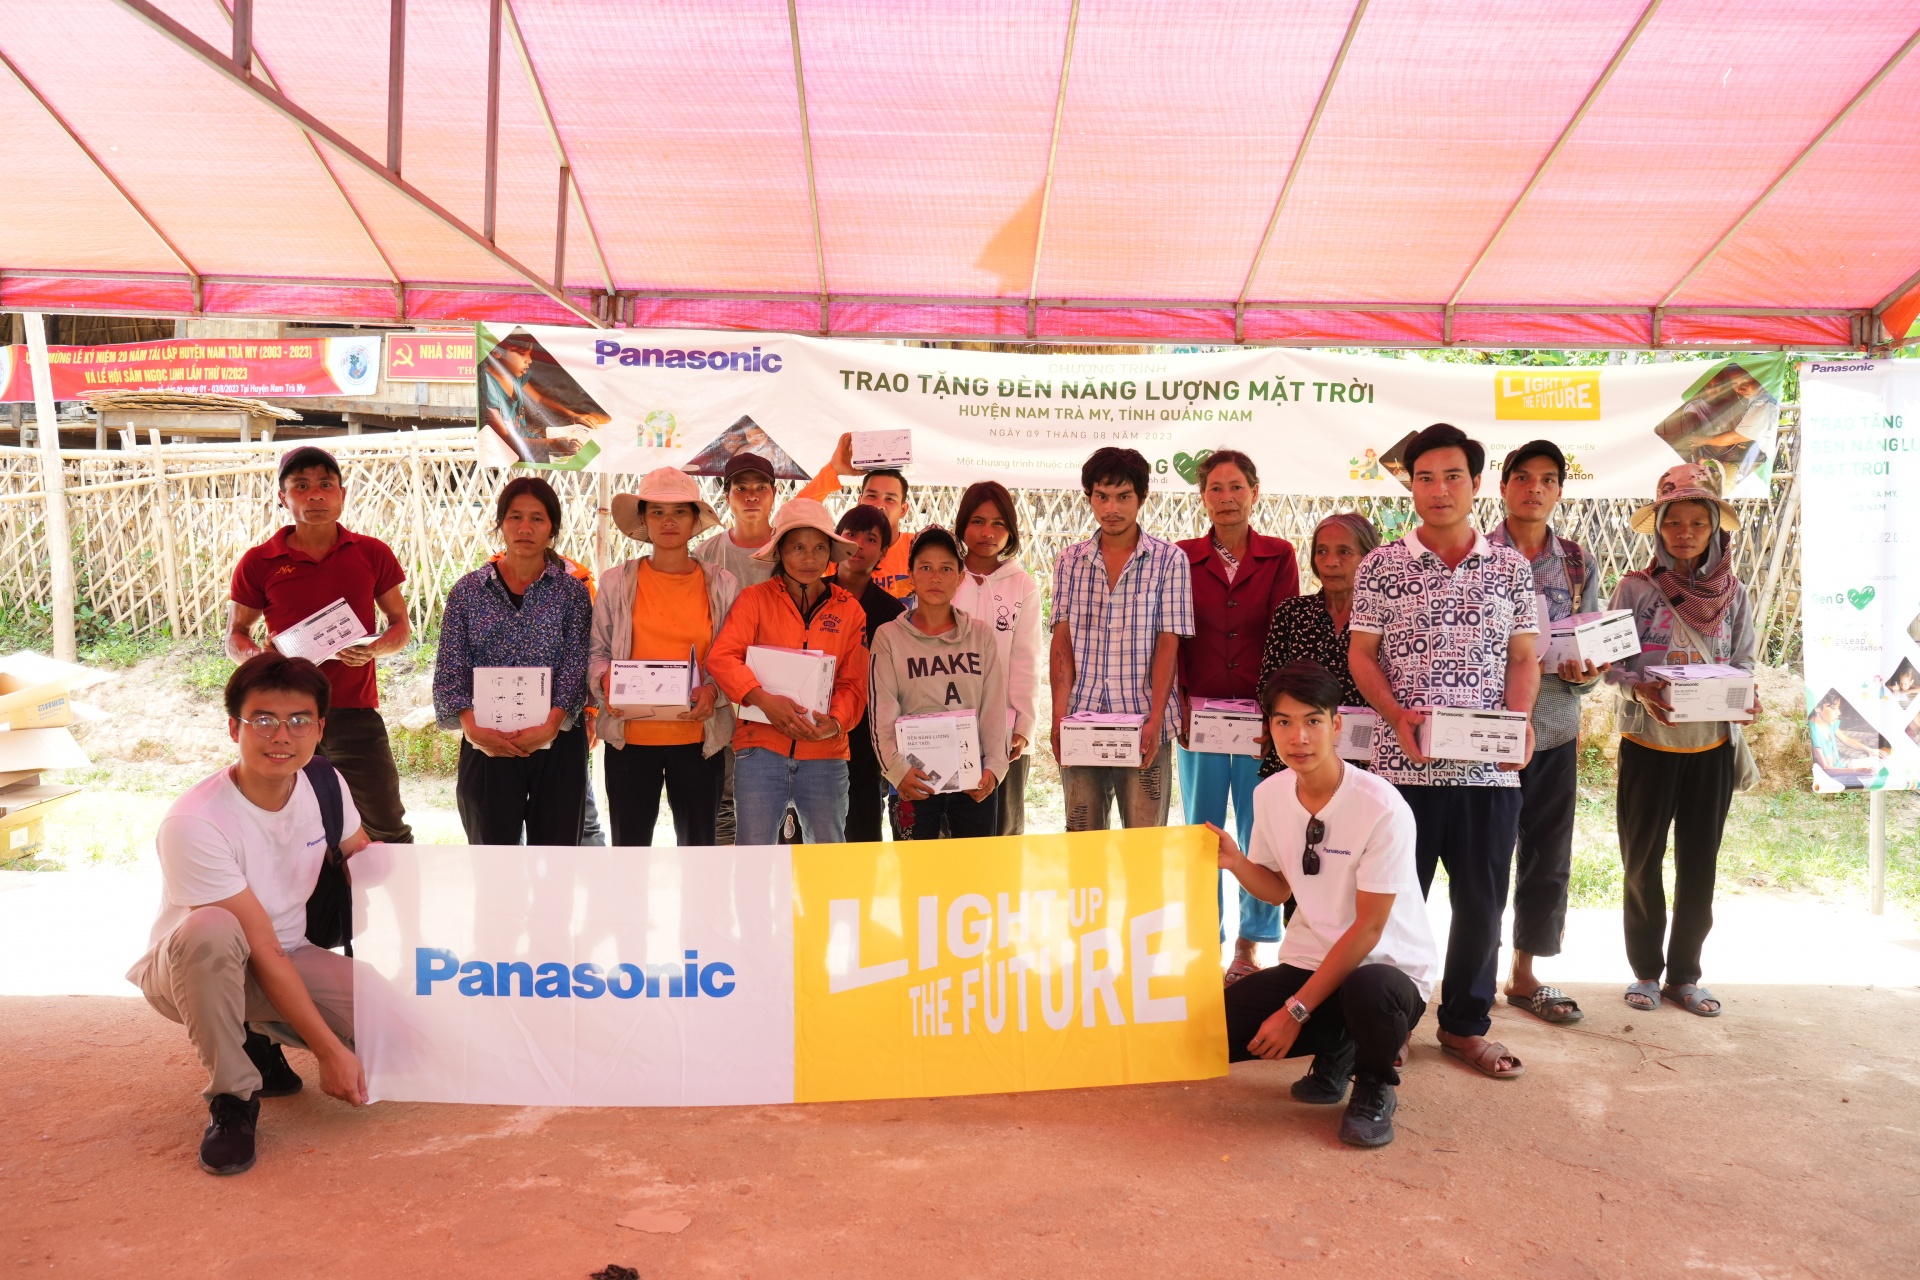 Panasonic brings light to over 300 disadvantaged households in Quang Nam